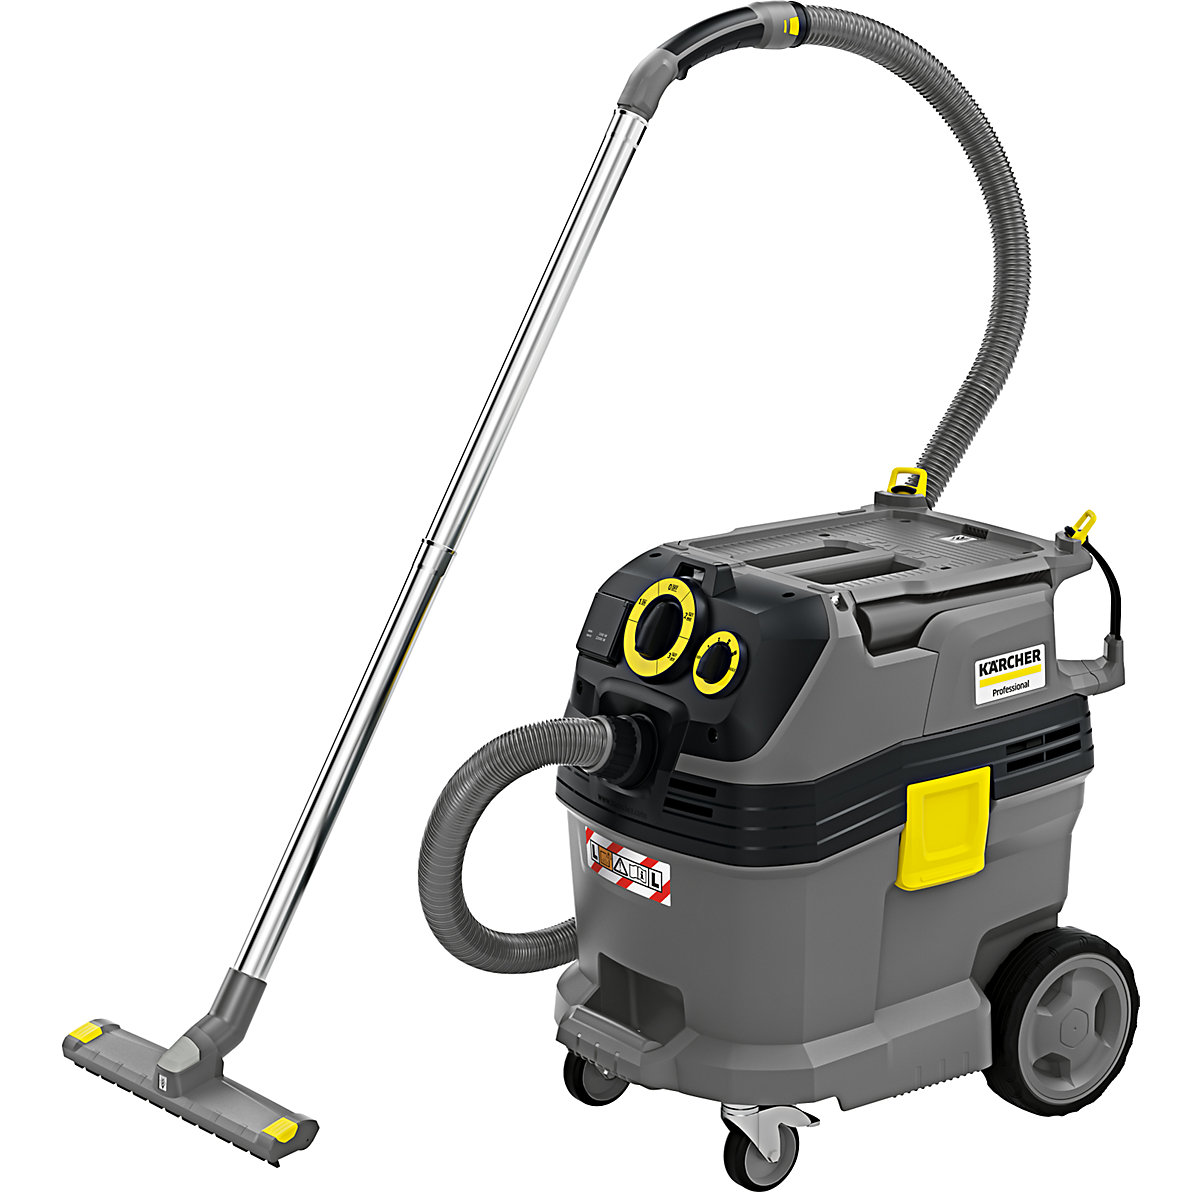 Wet and dry vacuum cleaner – Kärcher